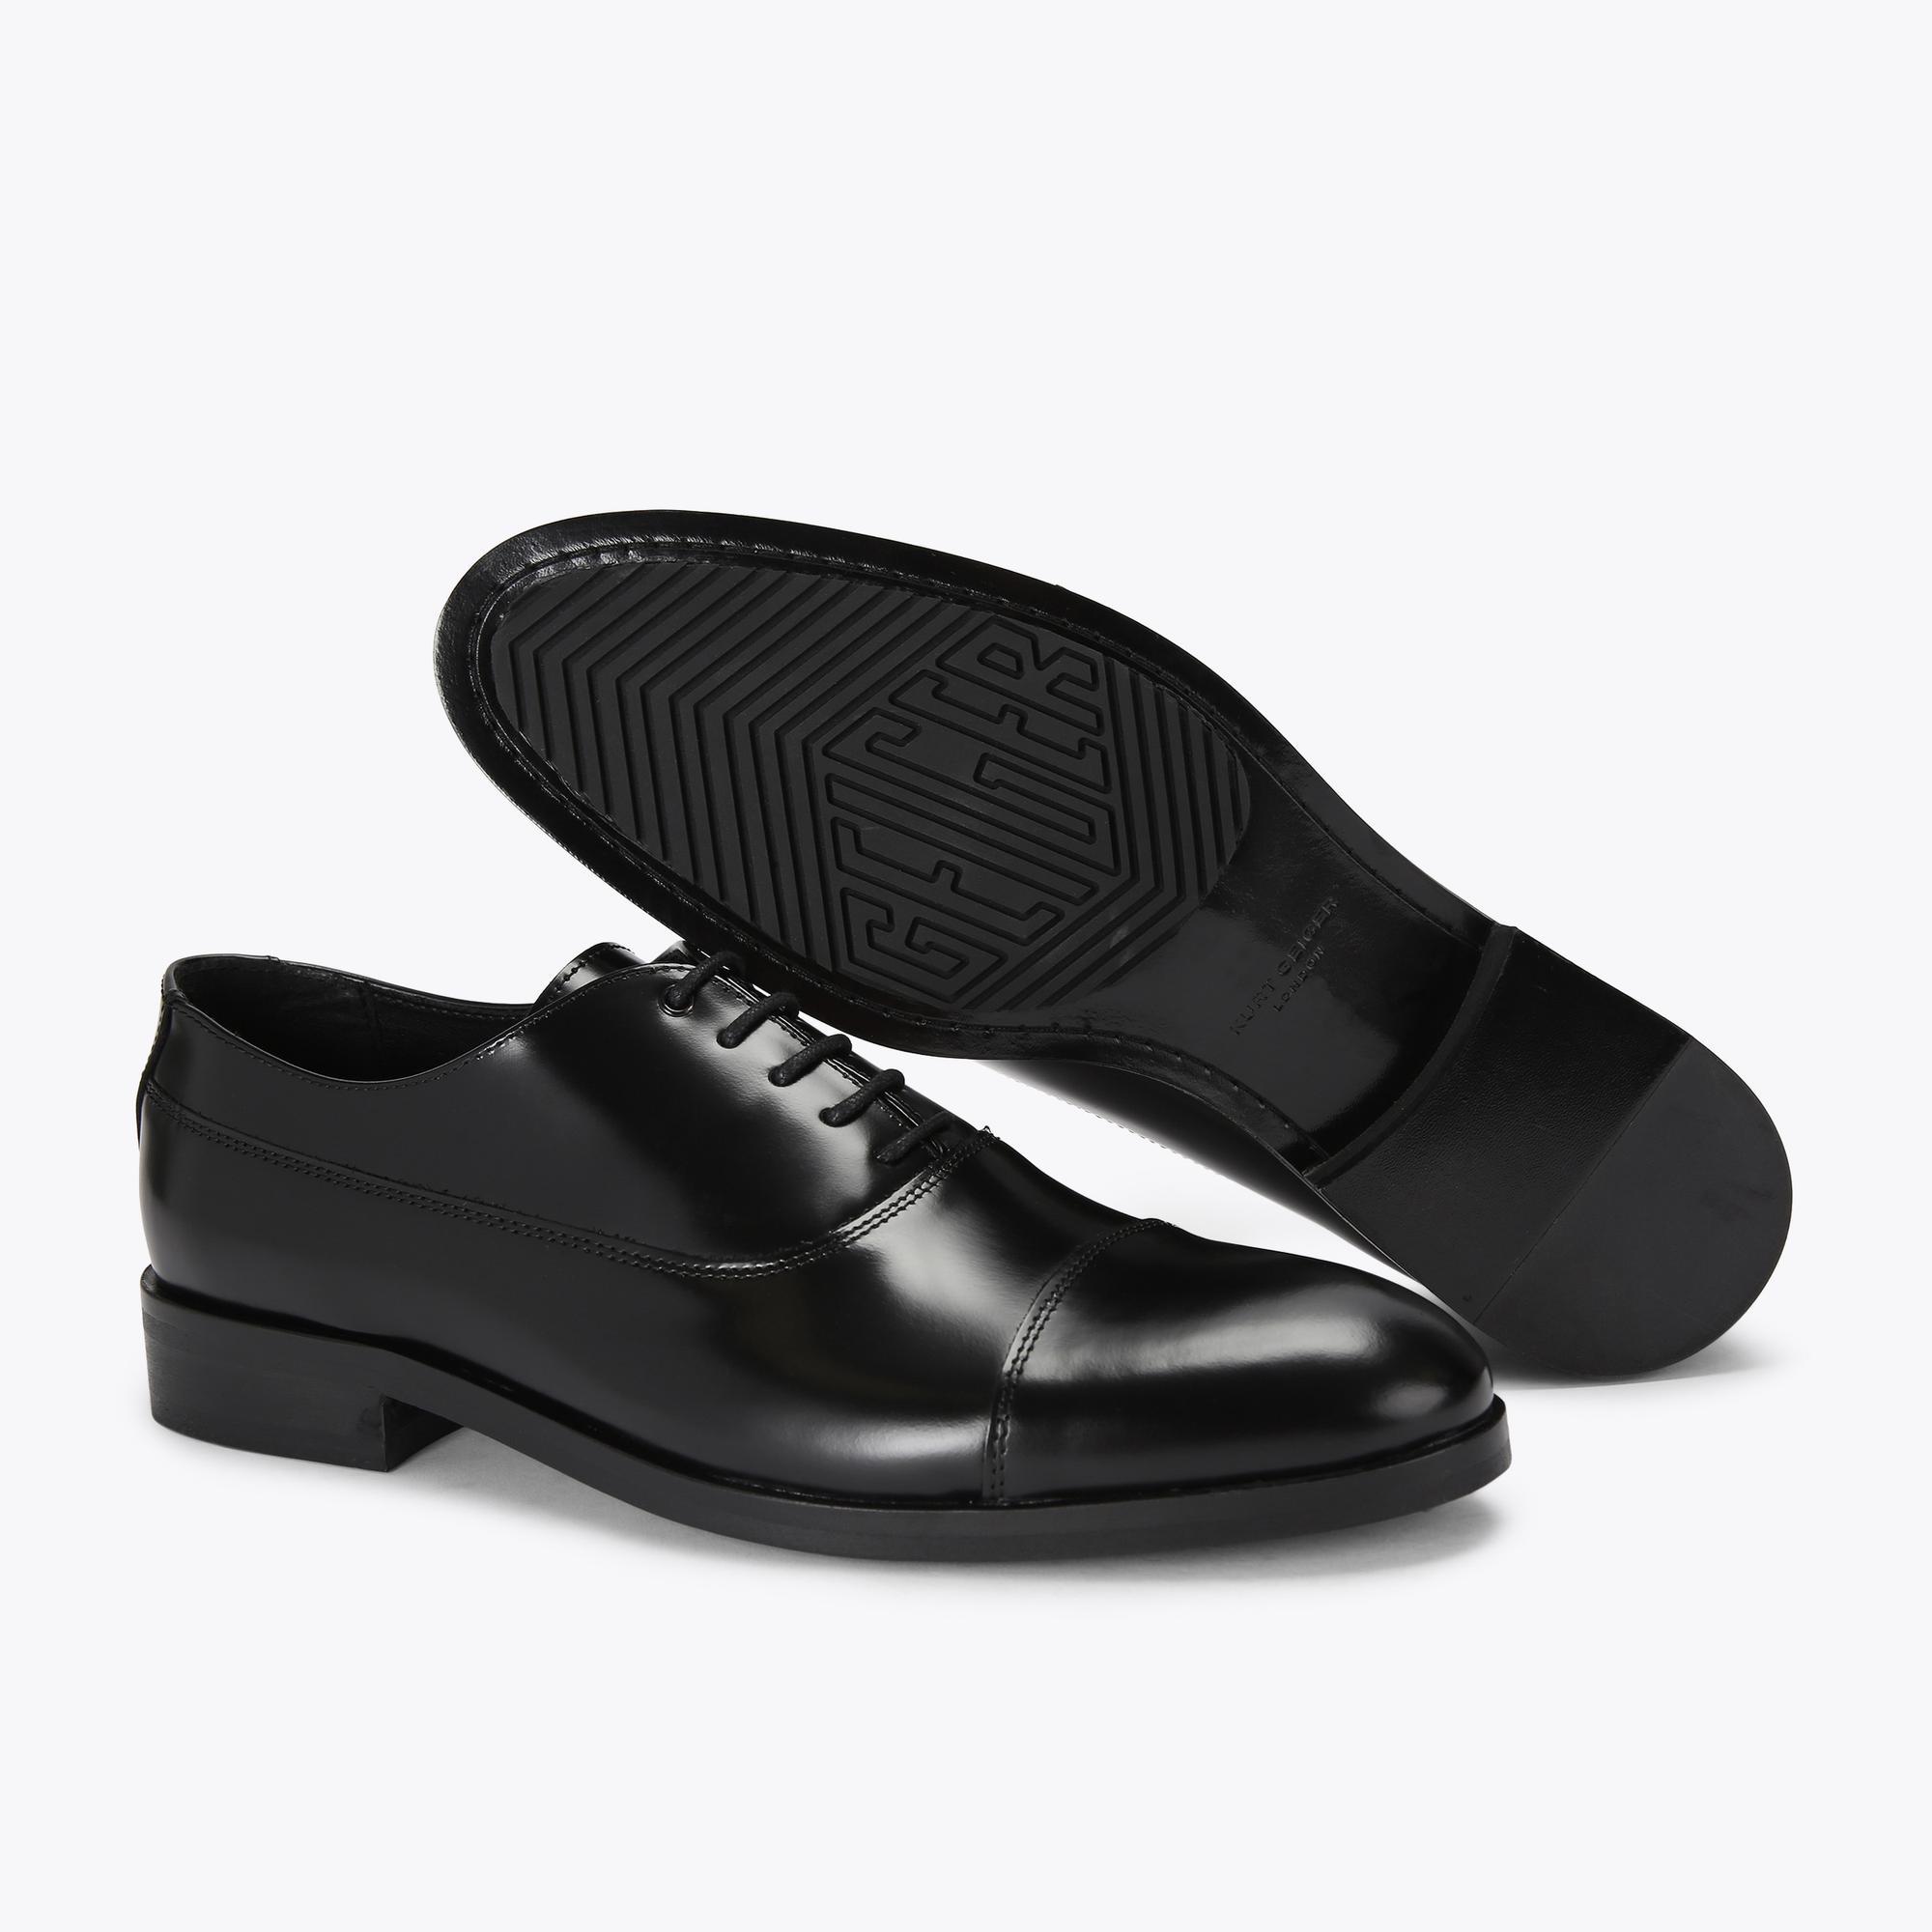 HUNTER OXFORD Black Leather Shoes by KURT GEIGER LONDON